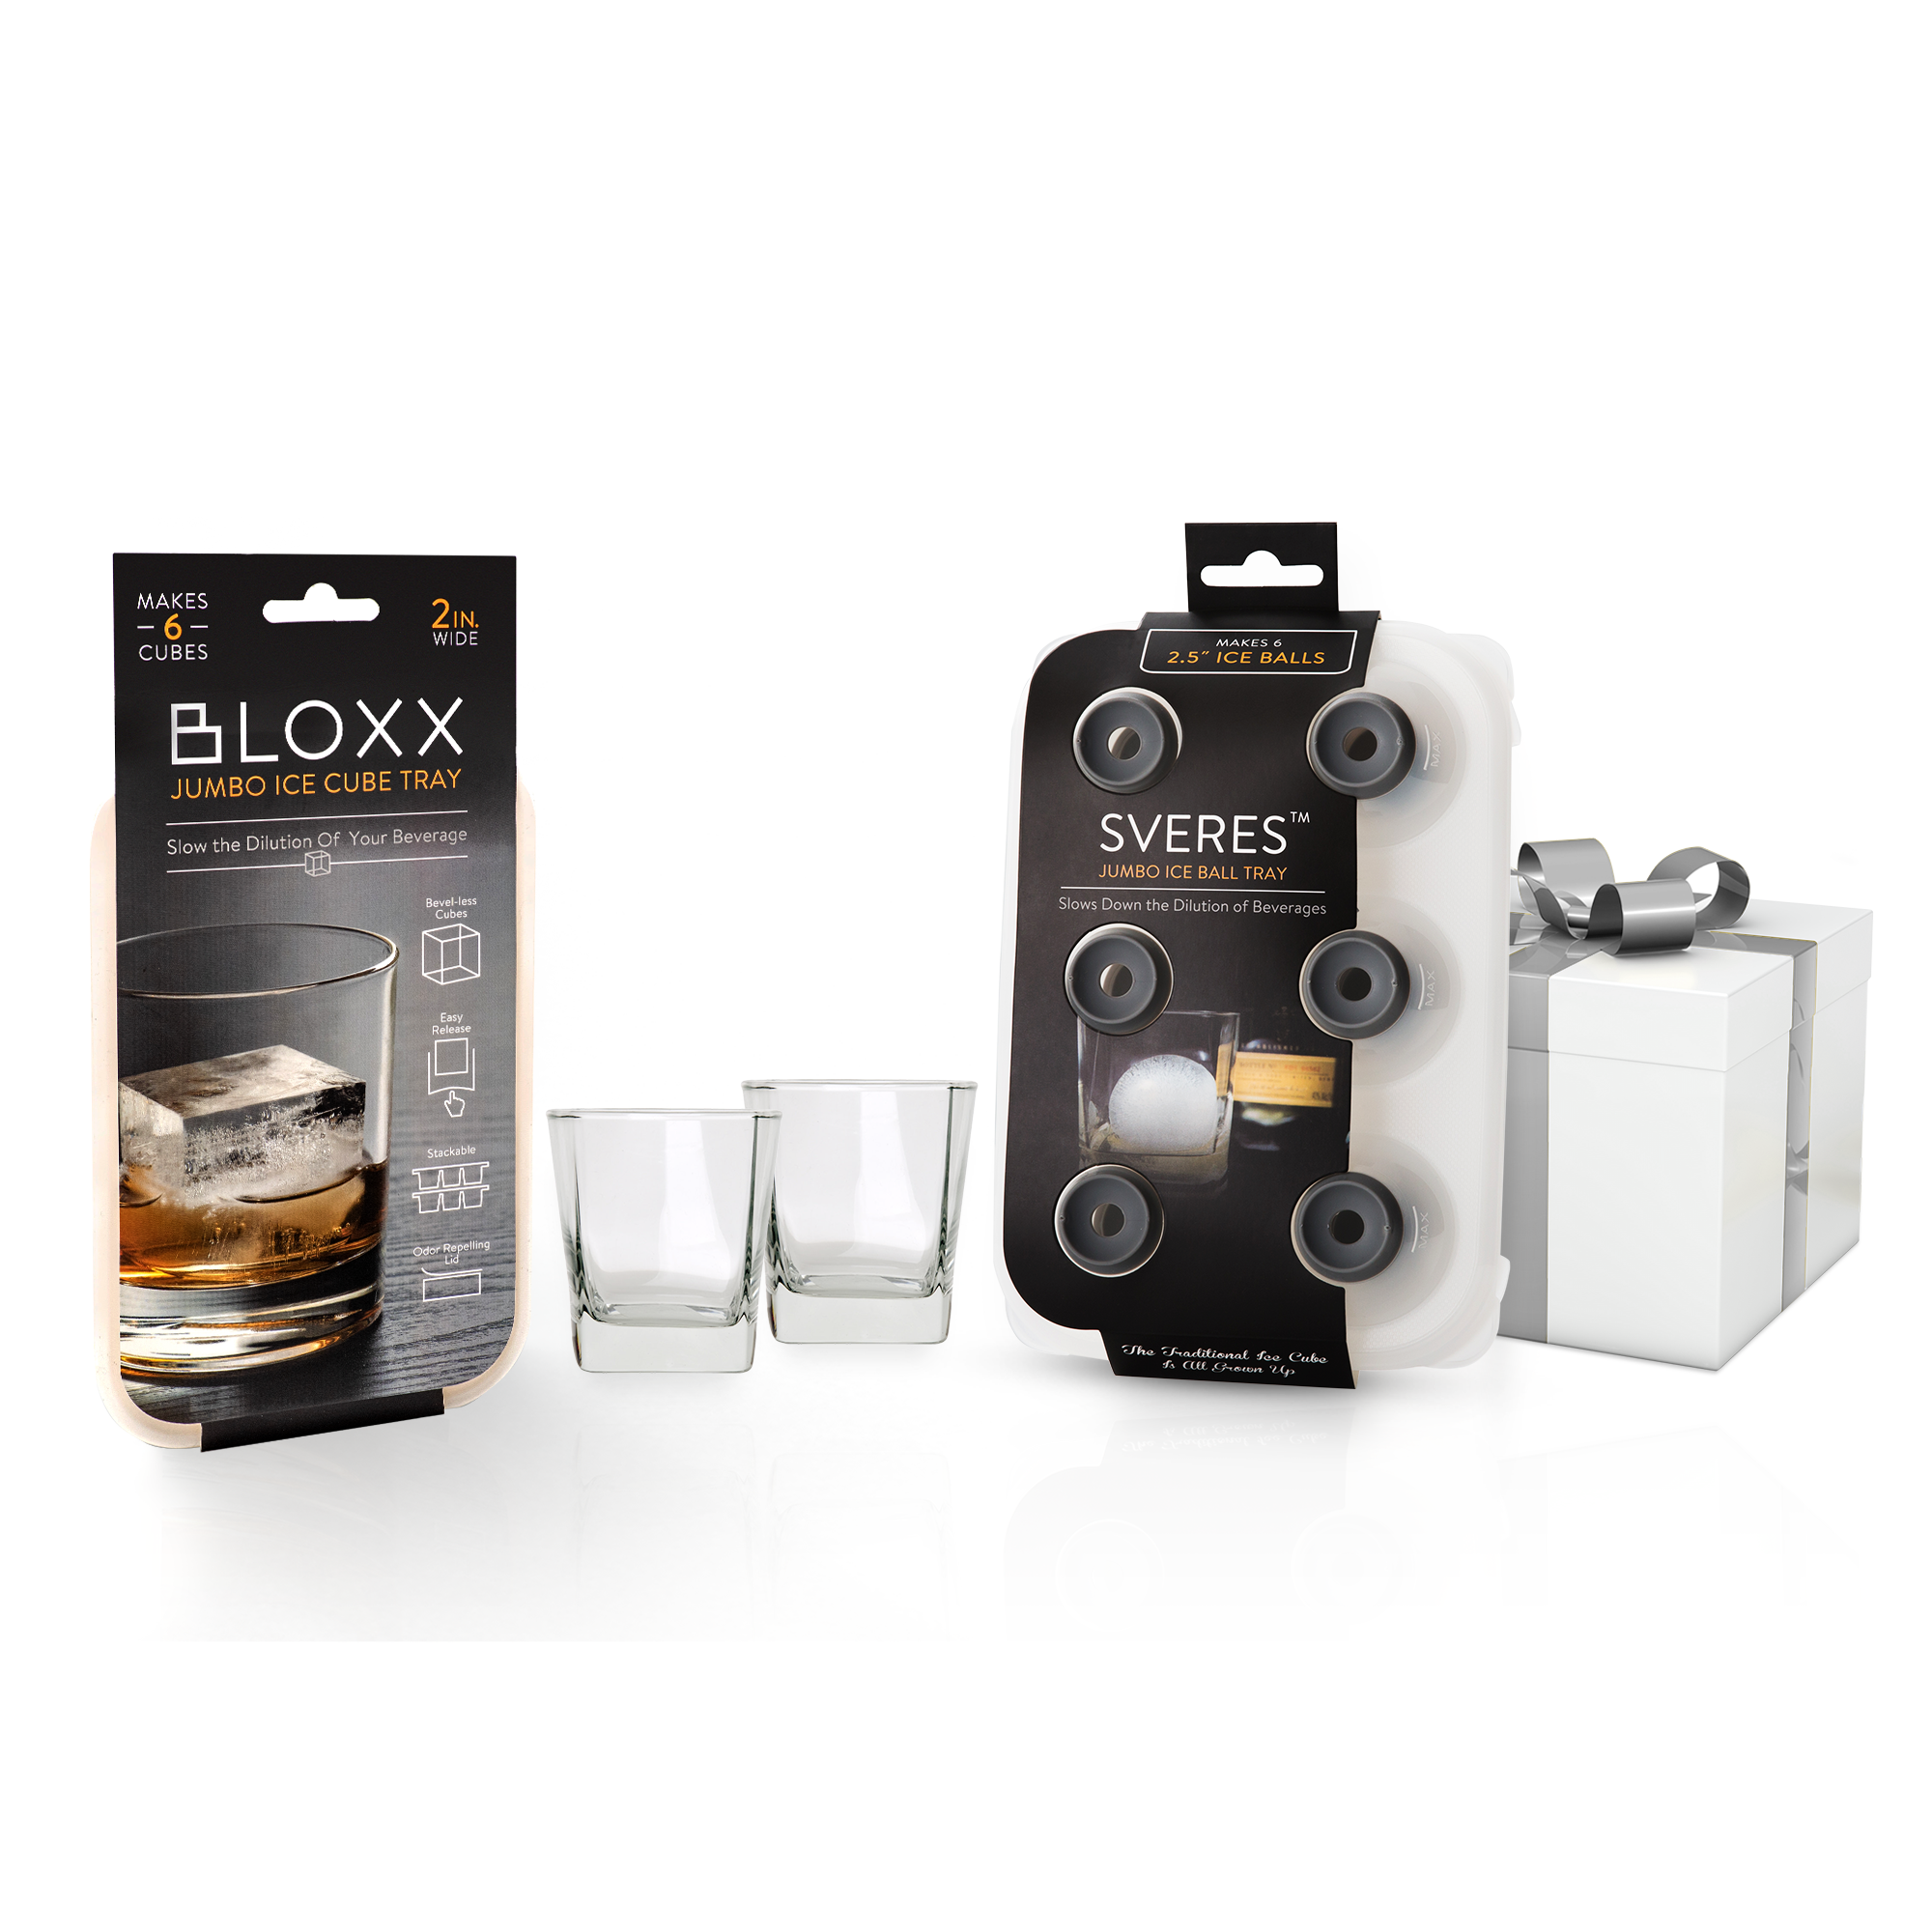 Sveres and Bloxx w/ Rock Glasses Gift Set by The Whiskey Ball